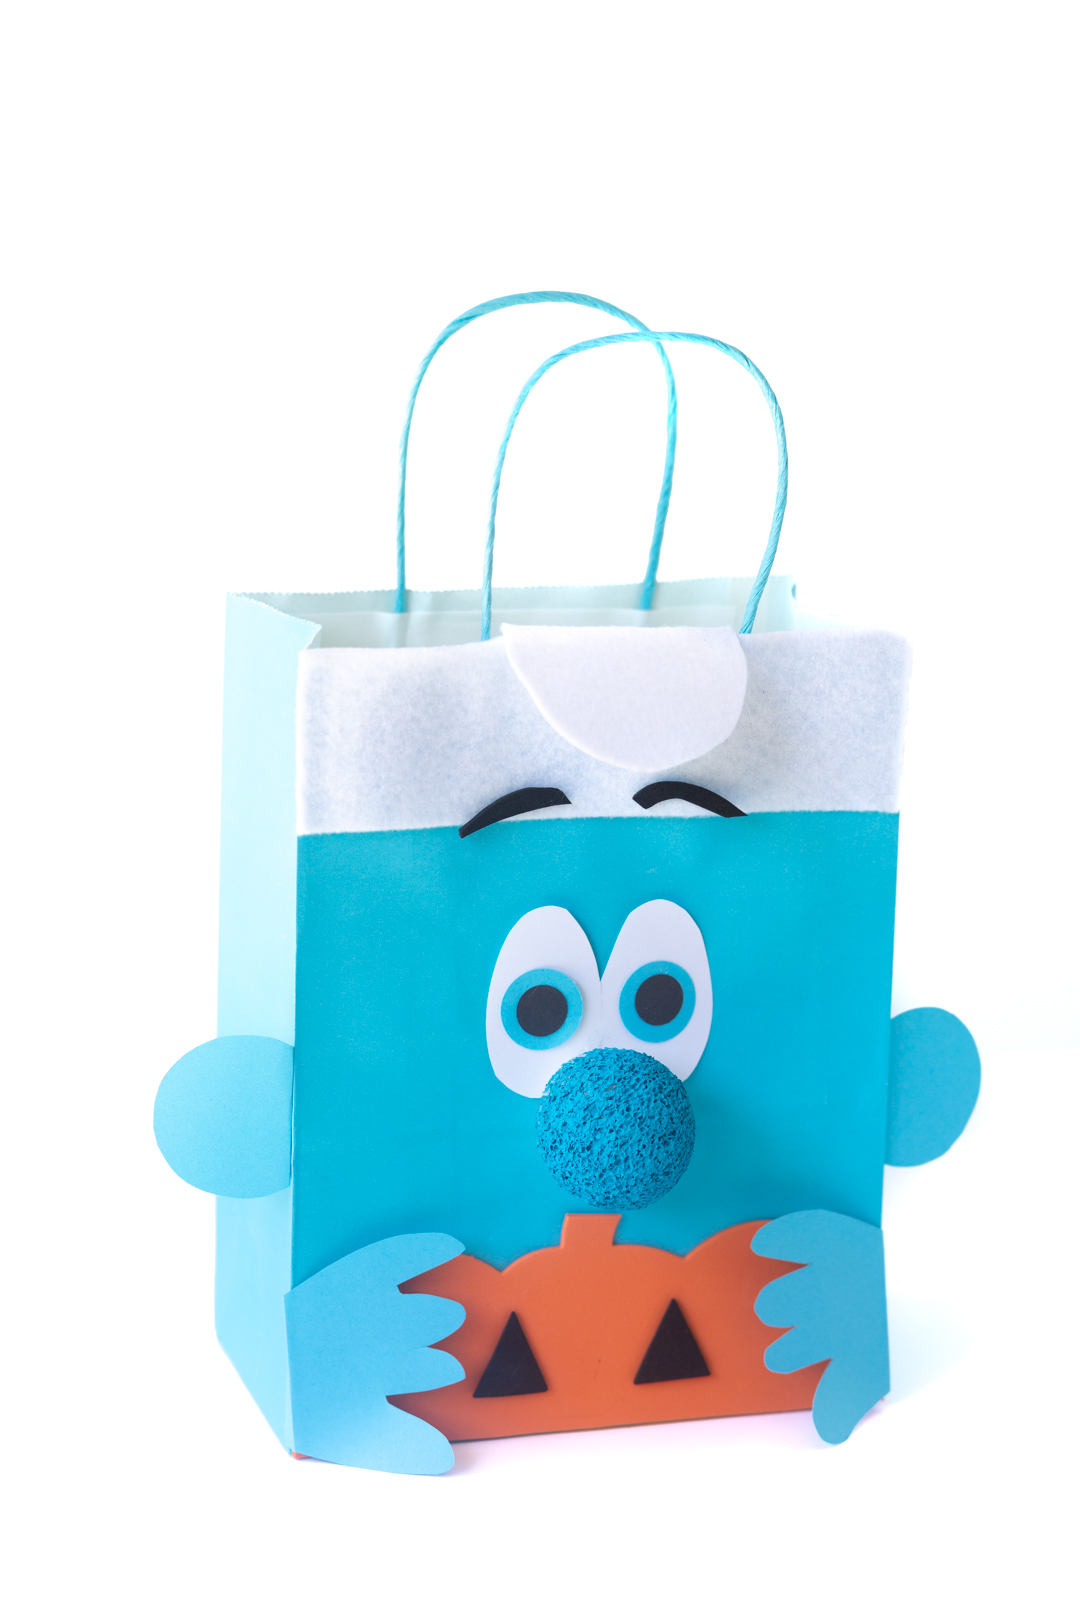 3d view of do it yourself smurf treat bag for halloween